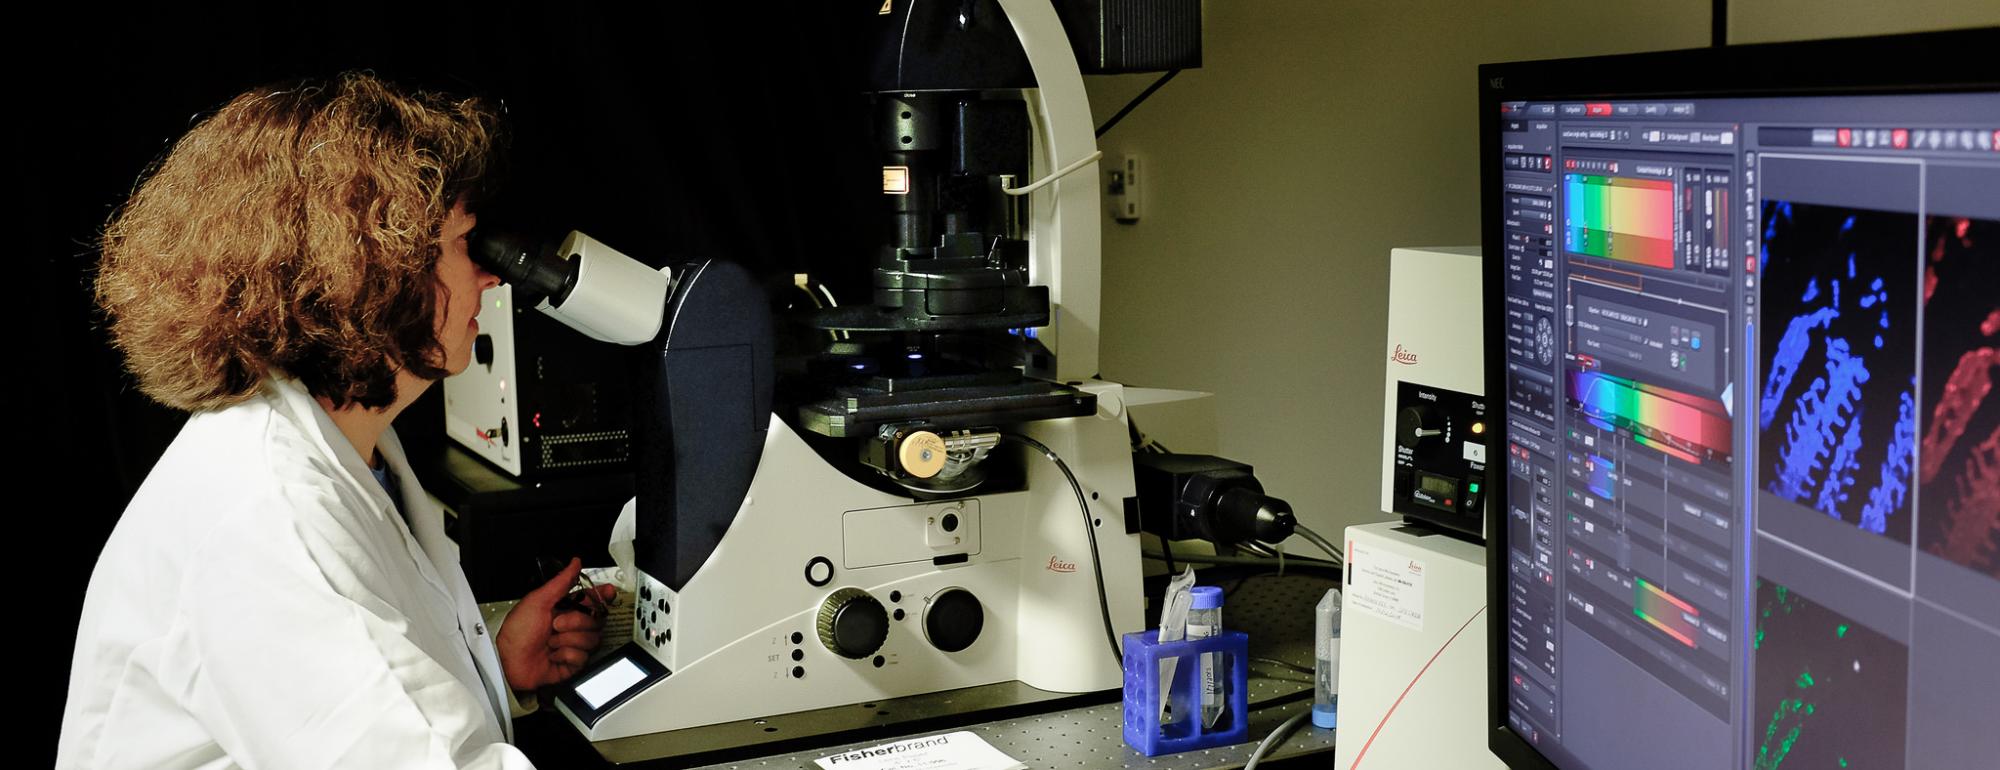 Ingrid Brust-Mascher uses a Leica Super High-Resolution Confocal Microscope in the Health Sciences District Advanced Imaging Facility in VetMed3B at the University of California School of Veterinary Medicine.